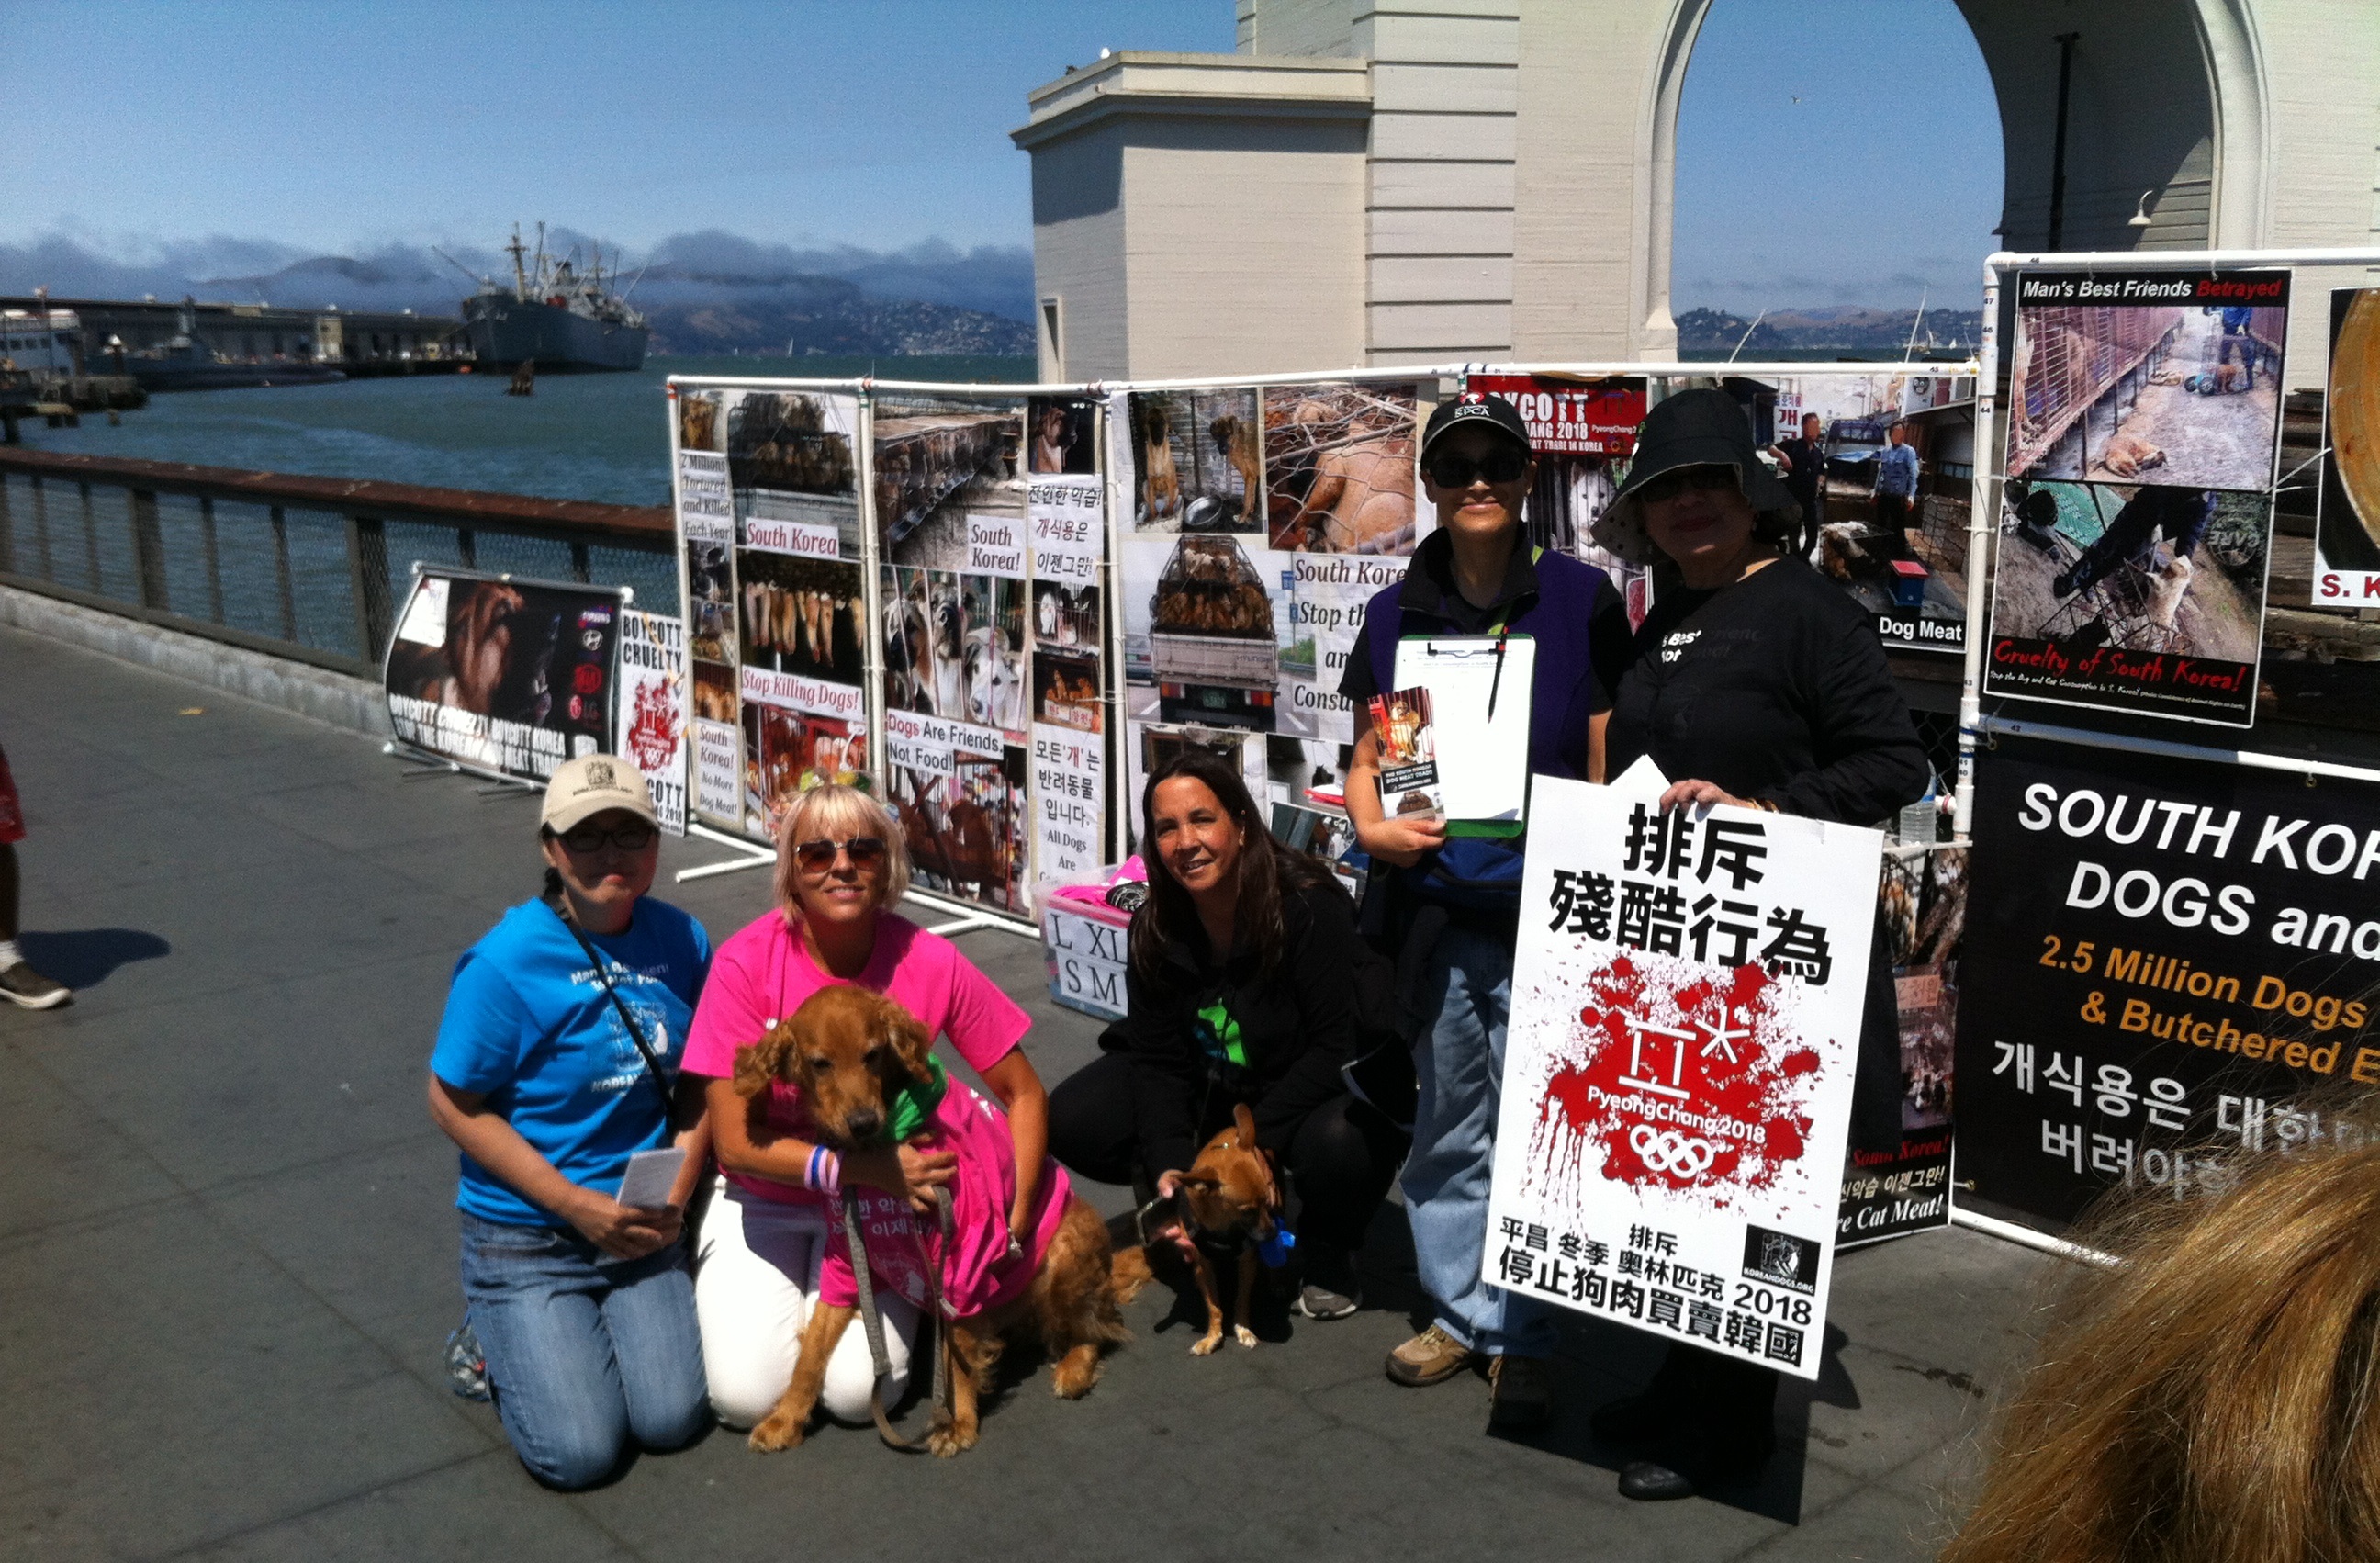 September 24, 2016 Saturday - Fisherman's Wharf, San Francisco, California. Leafleting and Informational Event on the South Korean Dog Meat Trade